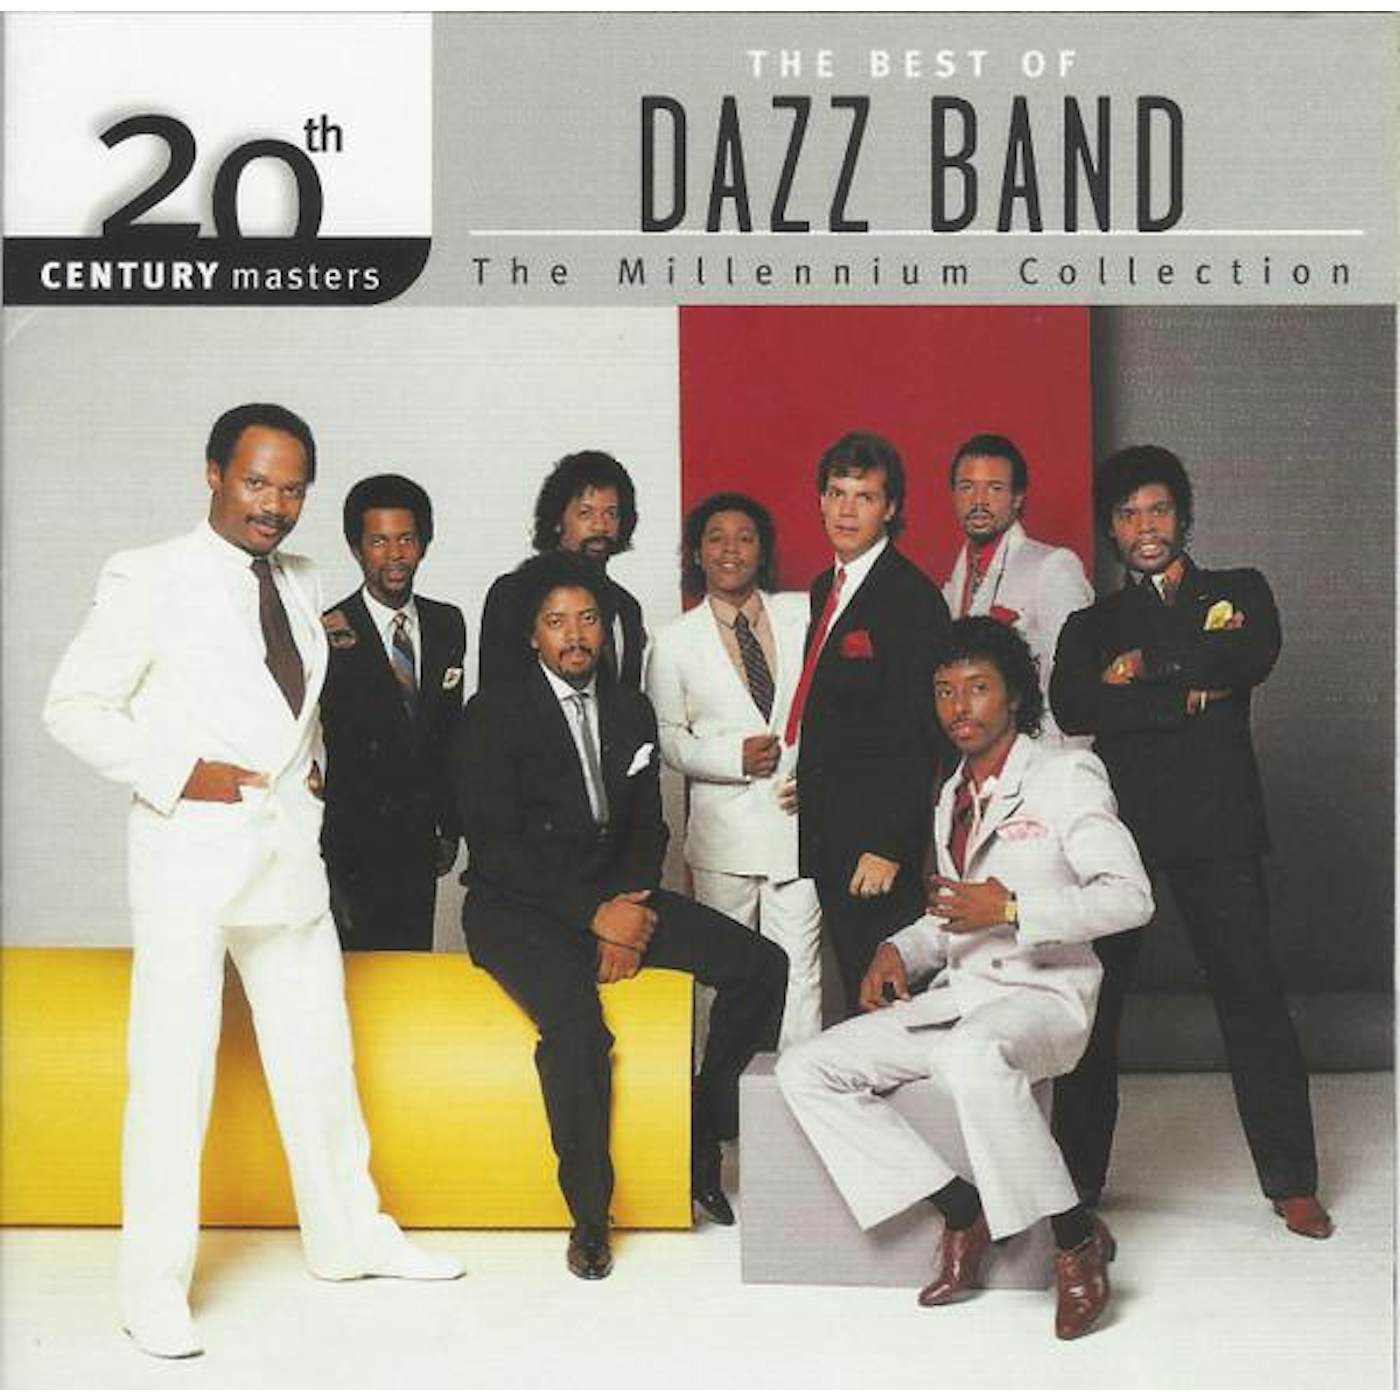 Dazz Band MILLENNIUM COLLECTION: 20TH CENTURY MASTERS CD